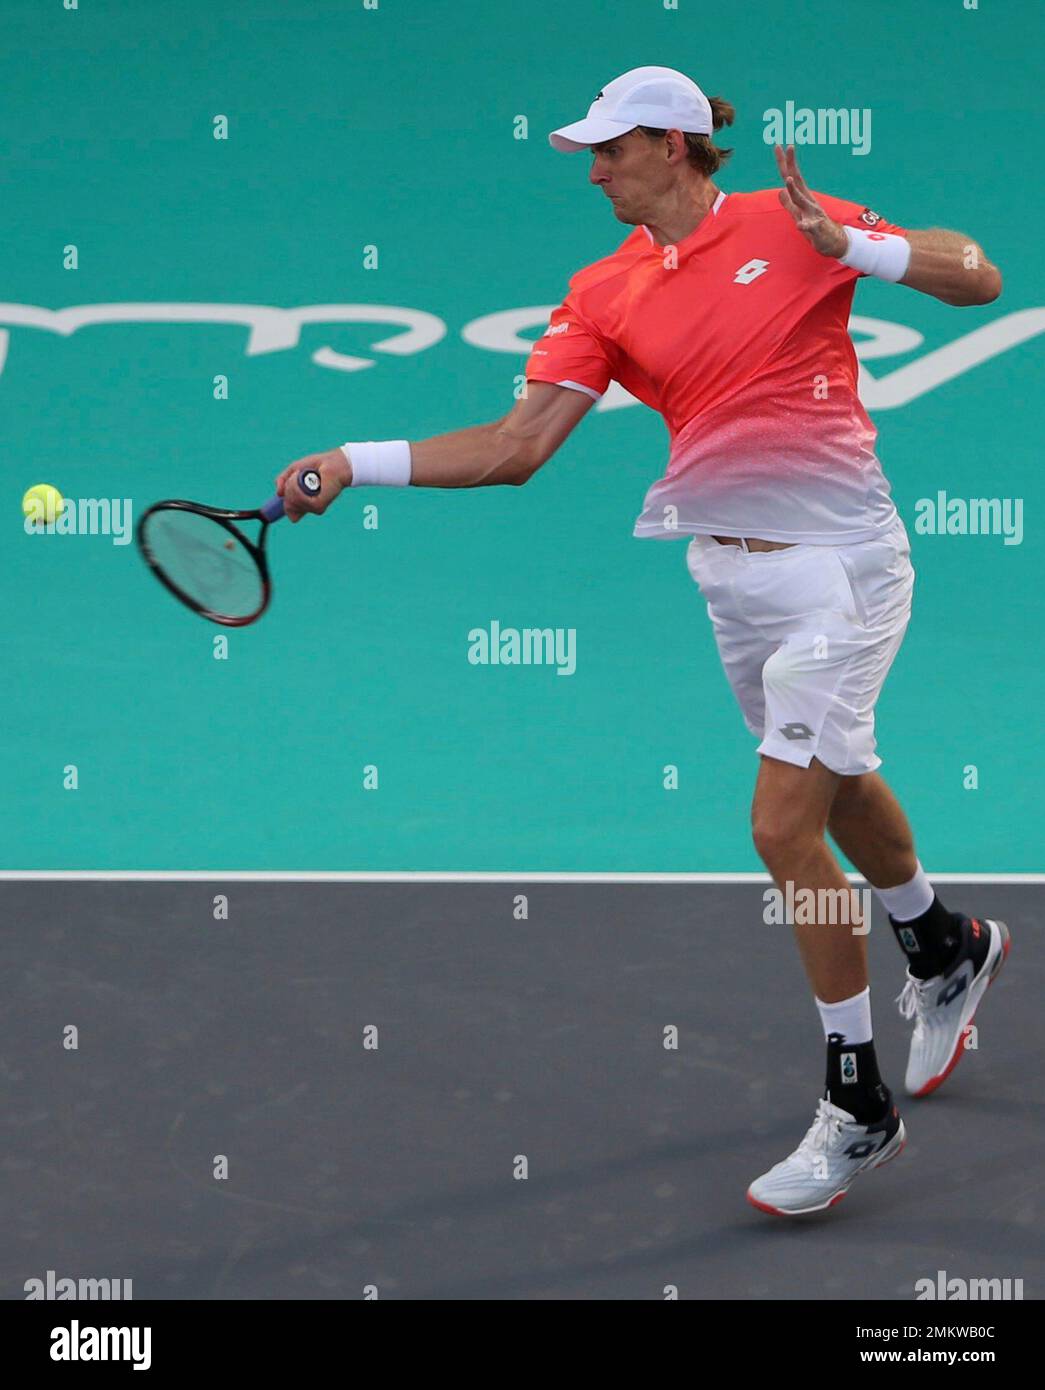 South Africa's Kevin Anderson returns the ball to South Korea's Hyeon Chung  on the opening day of the Mubadala World Tennis Championship in Abu Dhabi,  United Arab Emirates, Thursday, Dec. 27, 2018. (